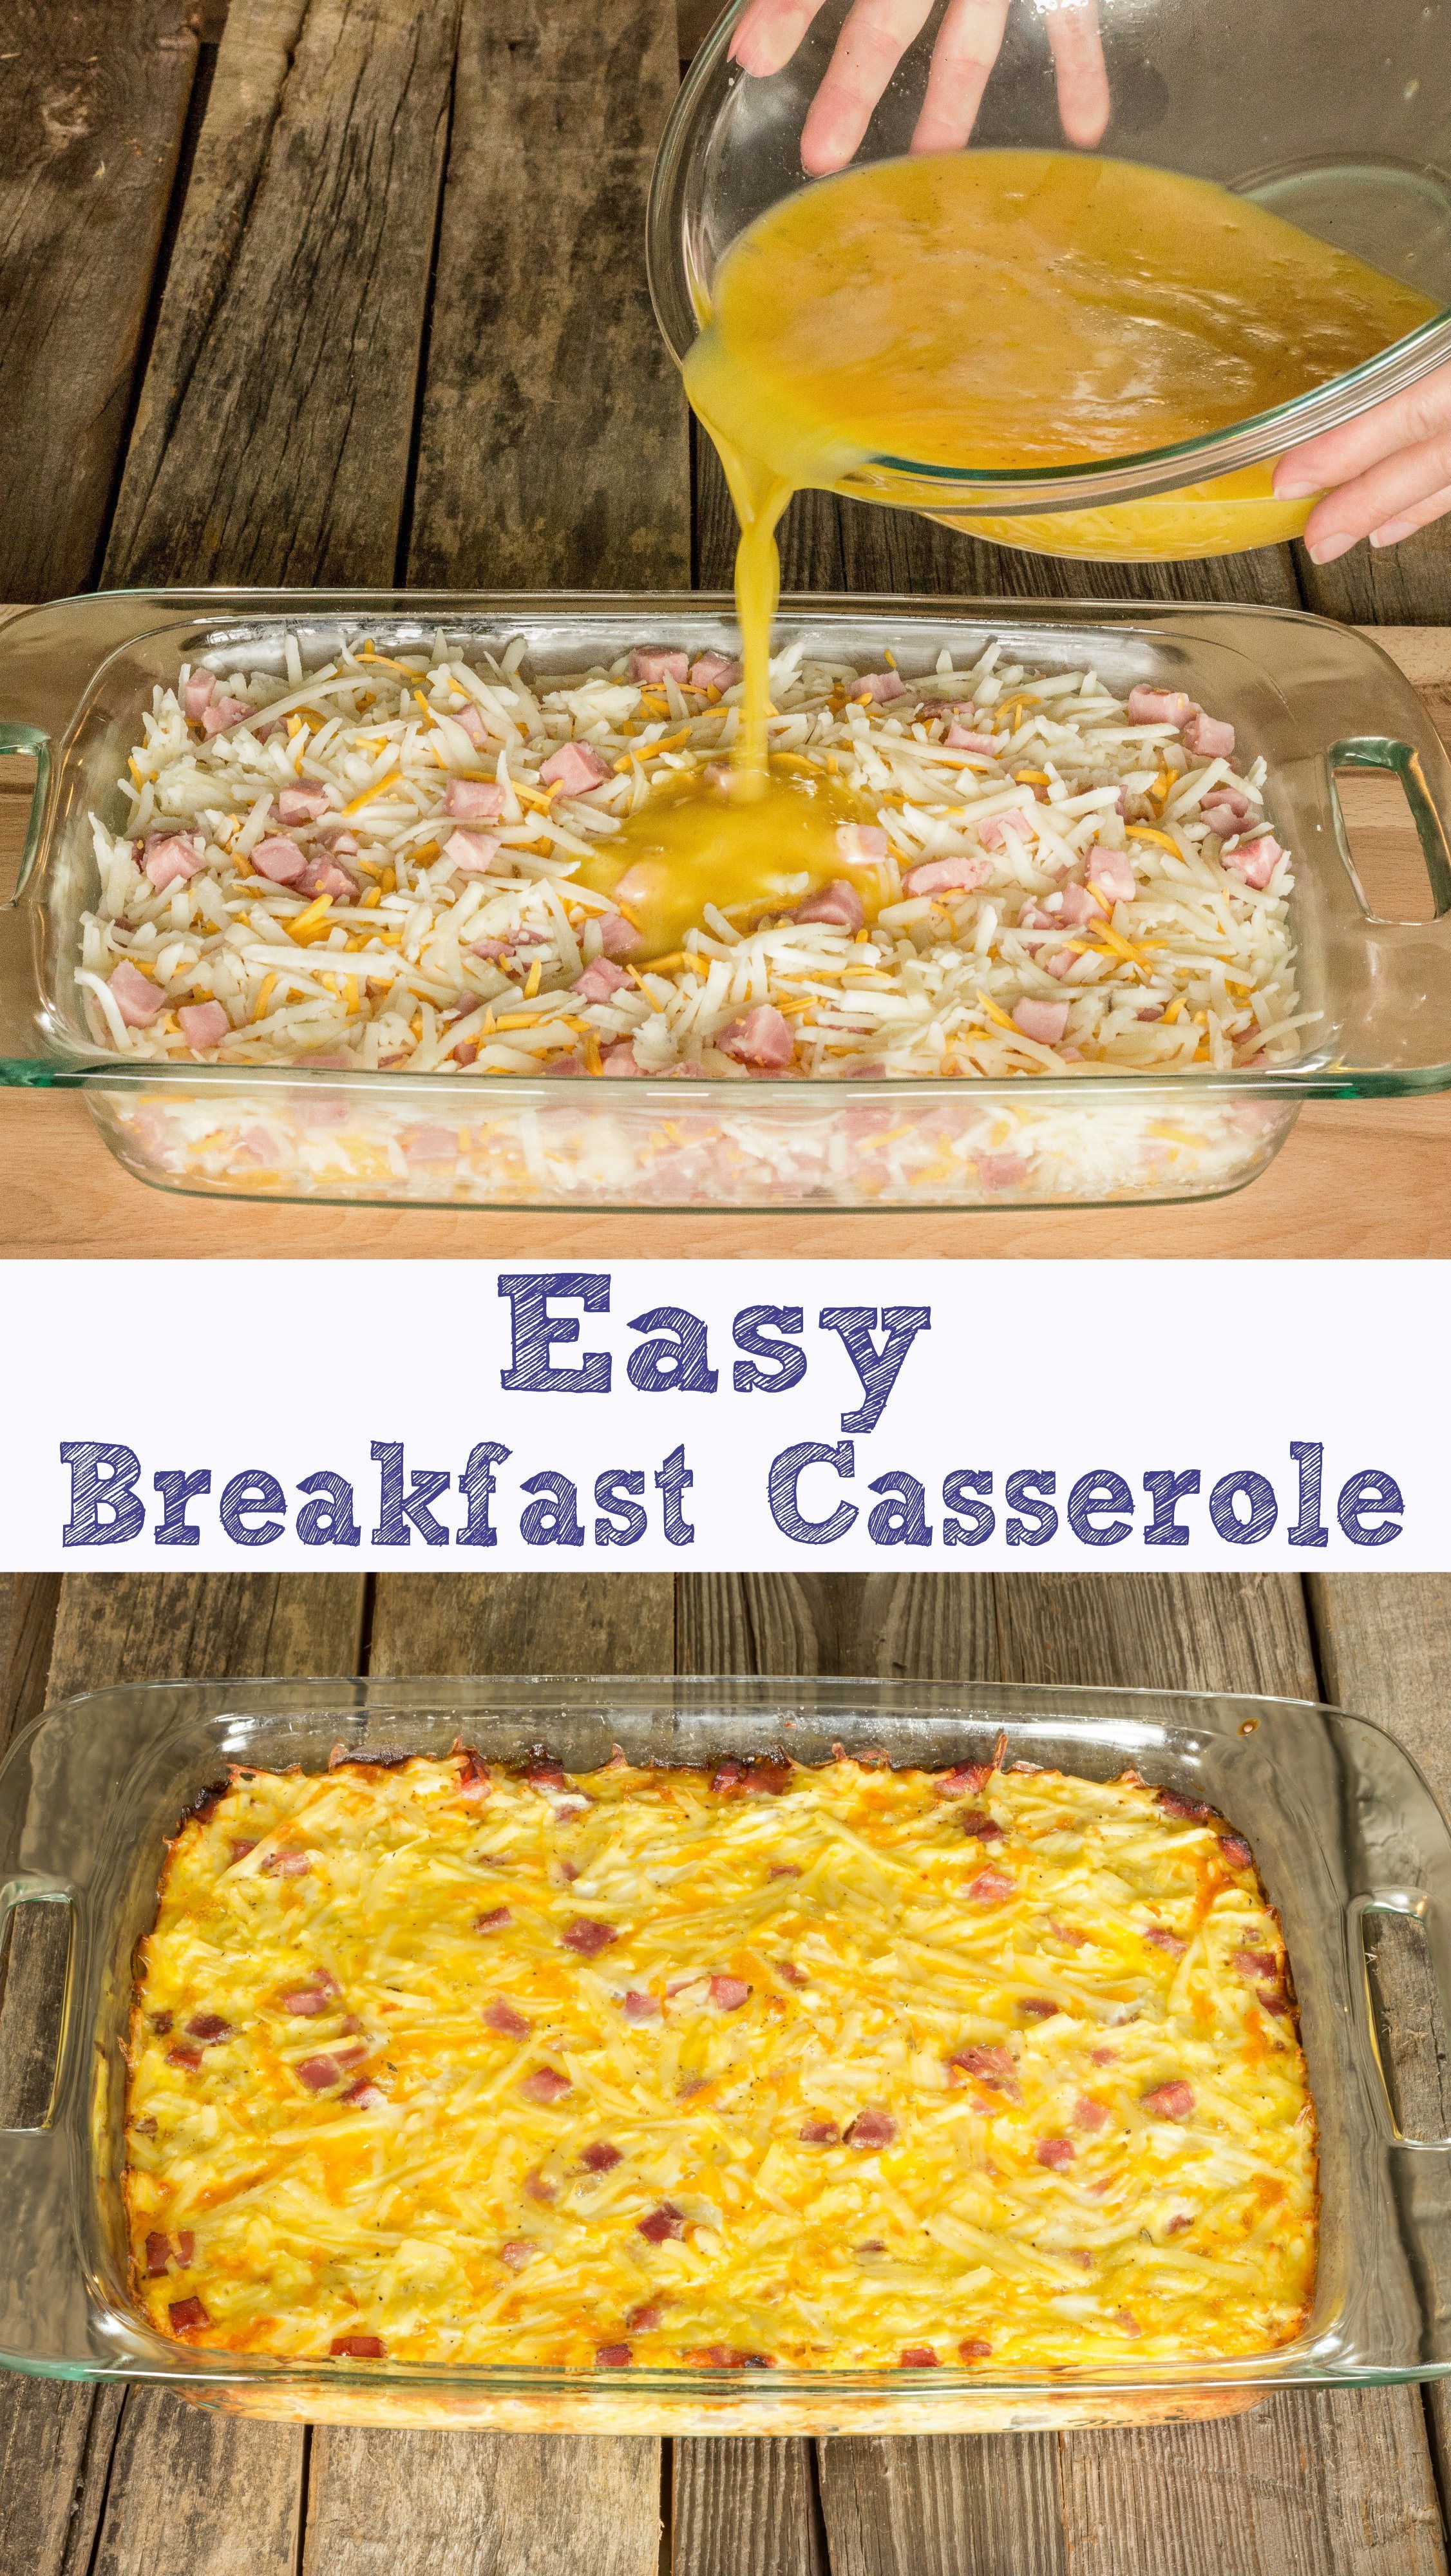 I love serving an Easy Breakfast Casserole when we have company or during the holidays!